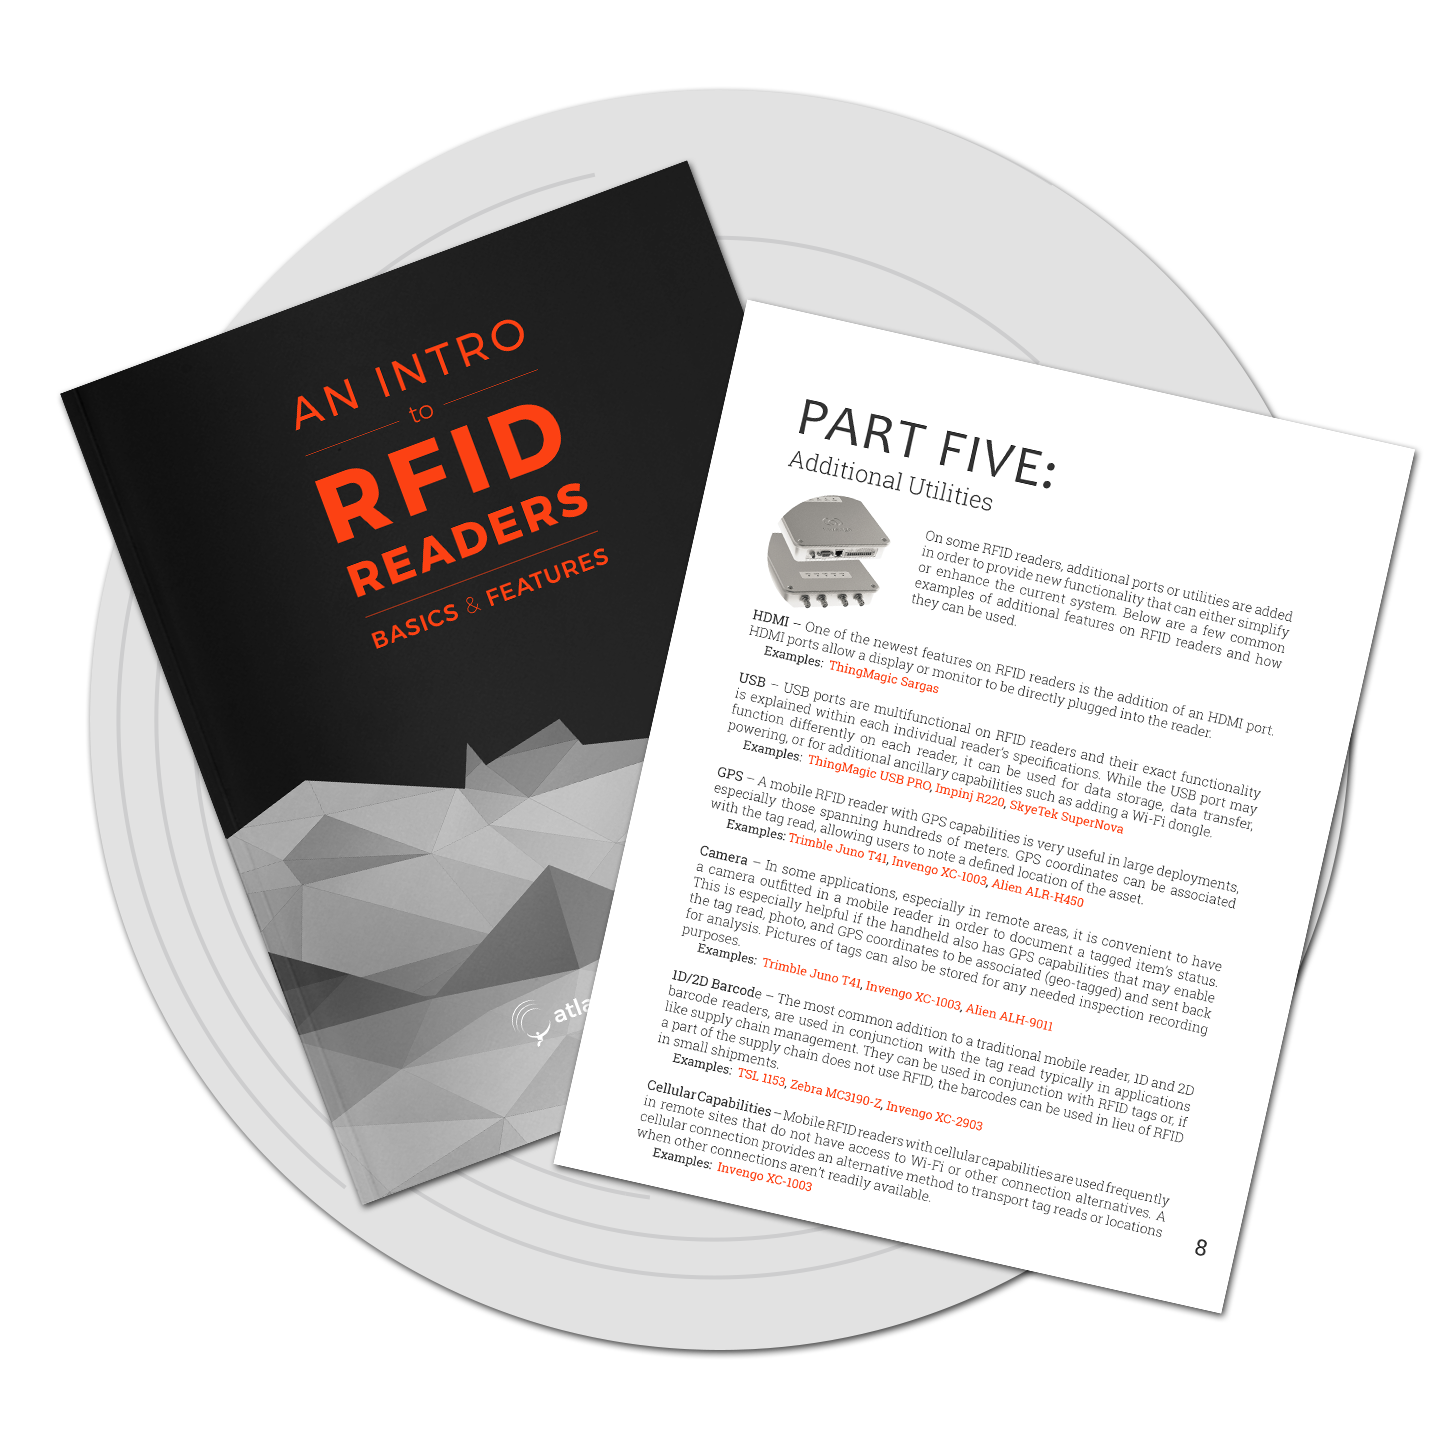 An Intro to RFID Readers